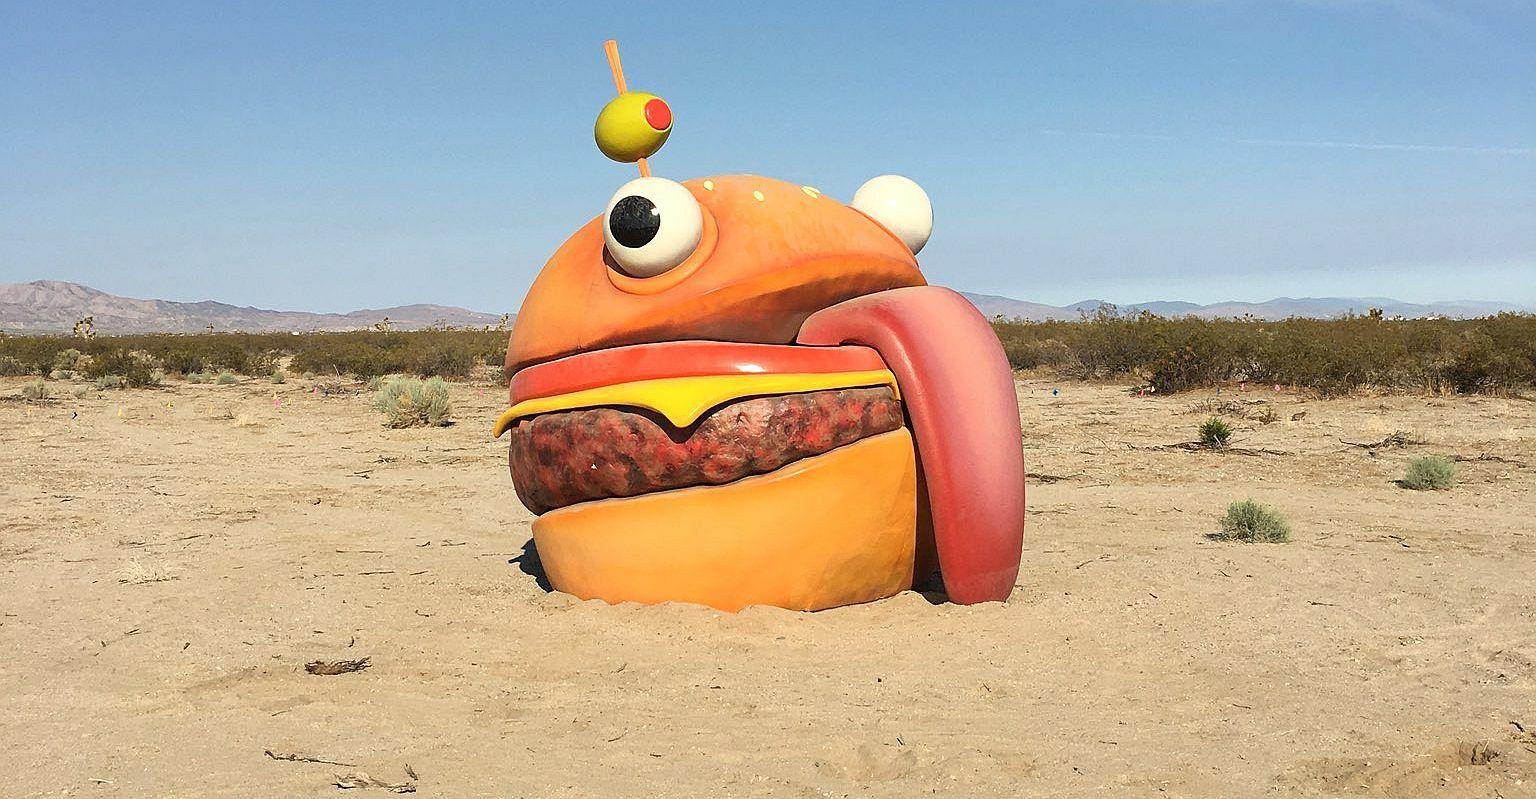 Fortnite Durr Burger found in the California desert with other props